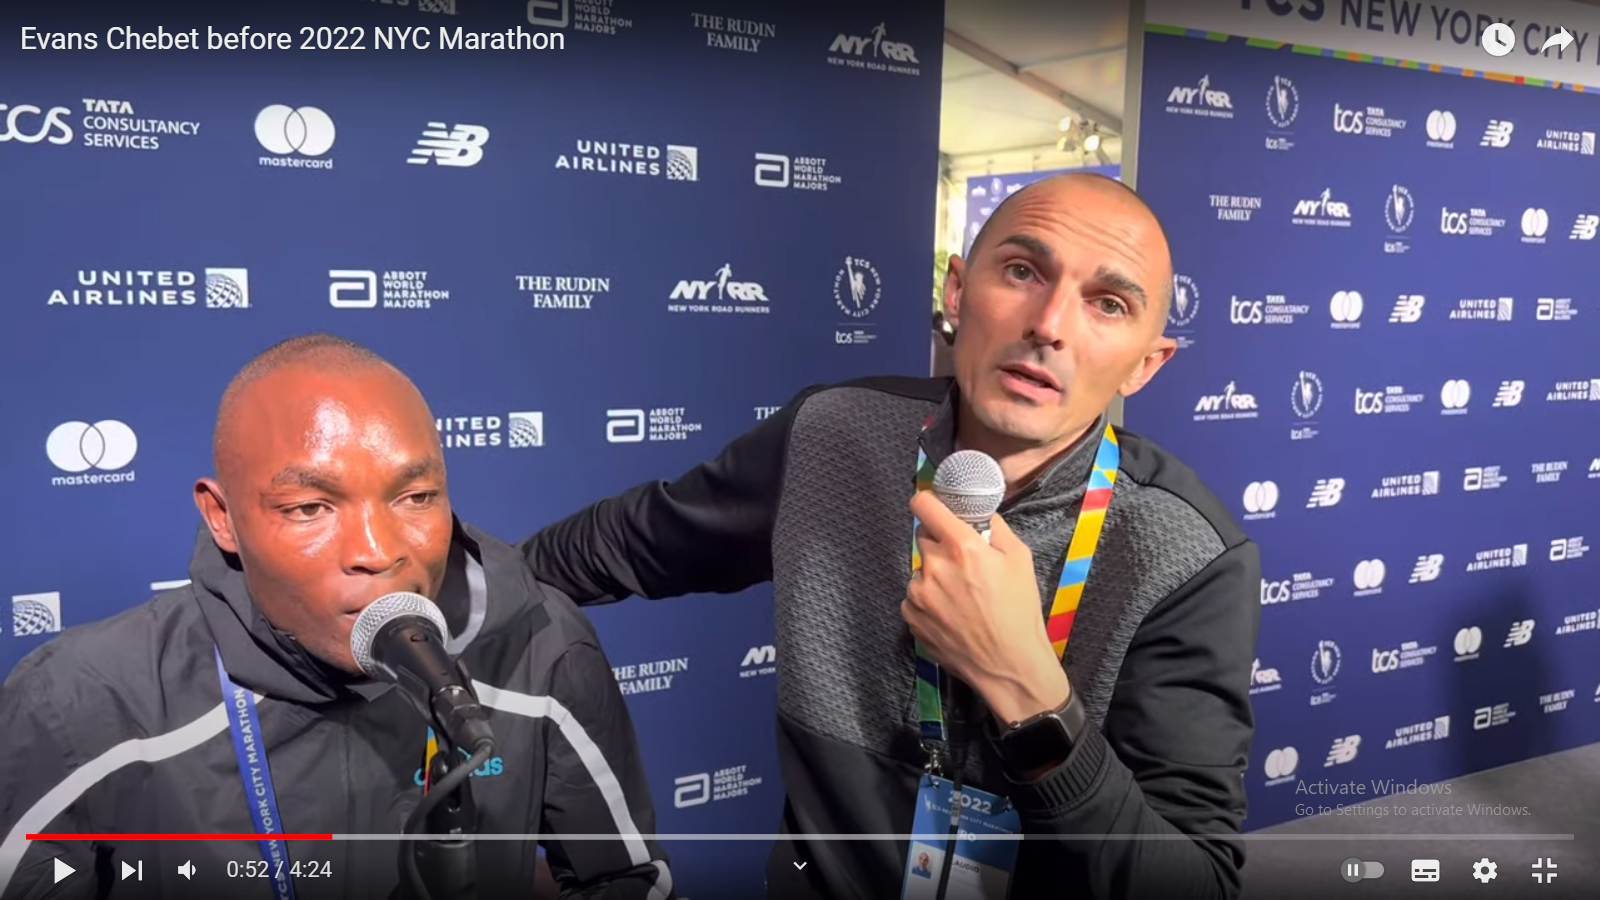 A YouTube screengrab of Kenya's Evans Chebet at a pre-race interview ahead of the New York City Marathon in November 2022. Image source; Letsrundotcom